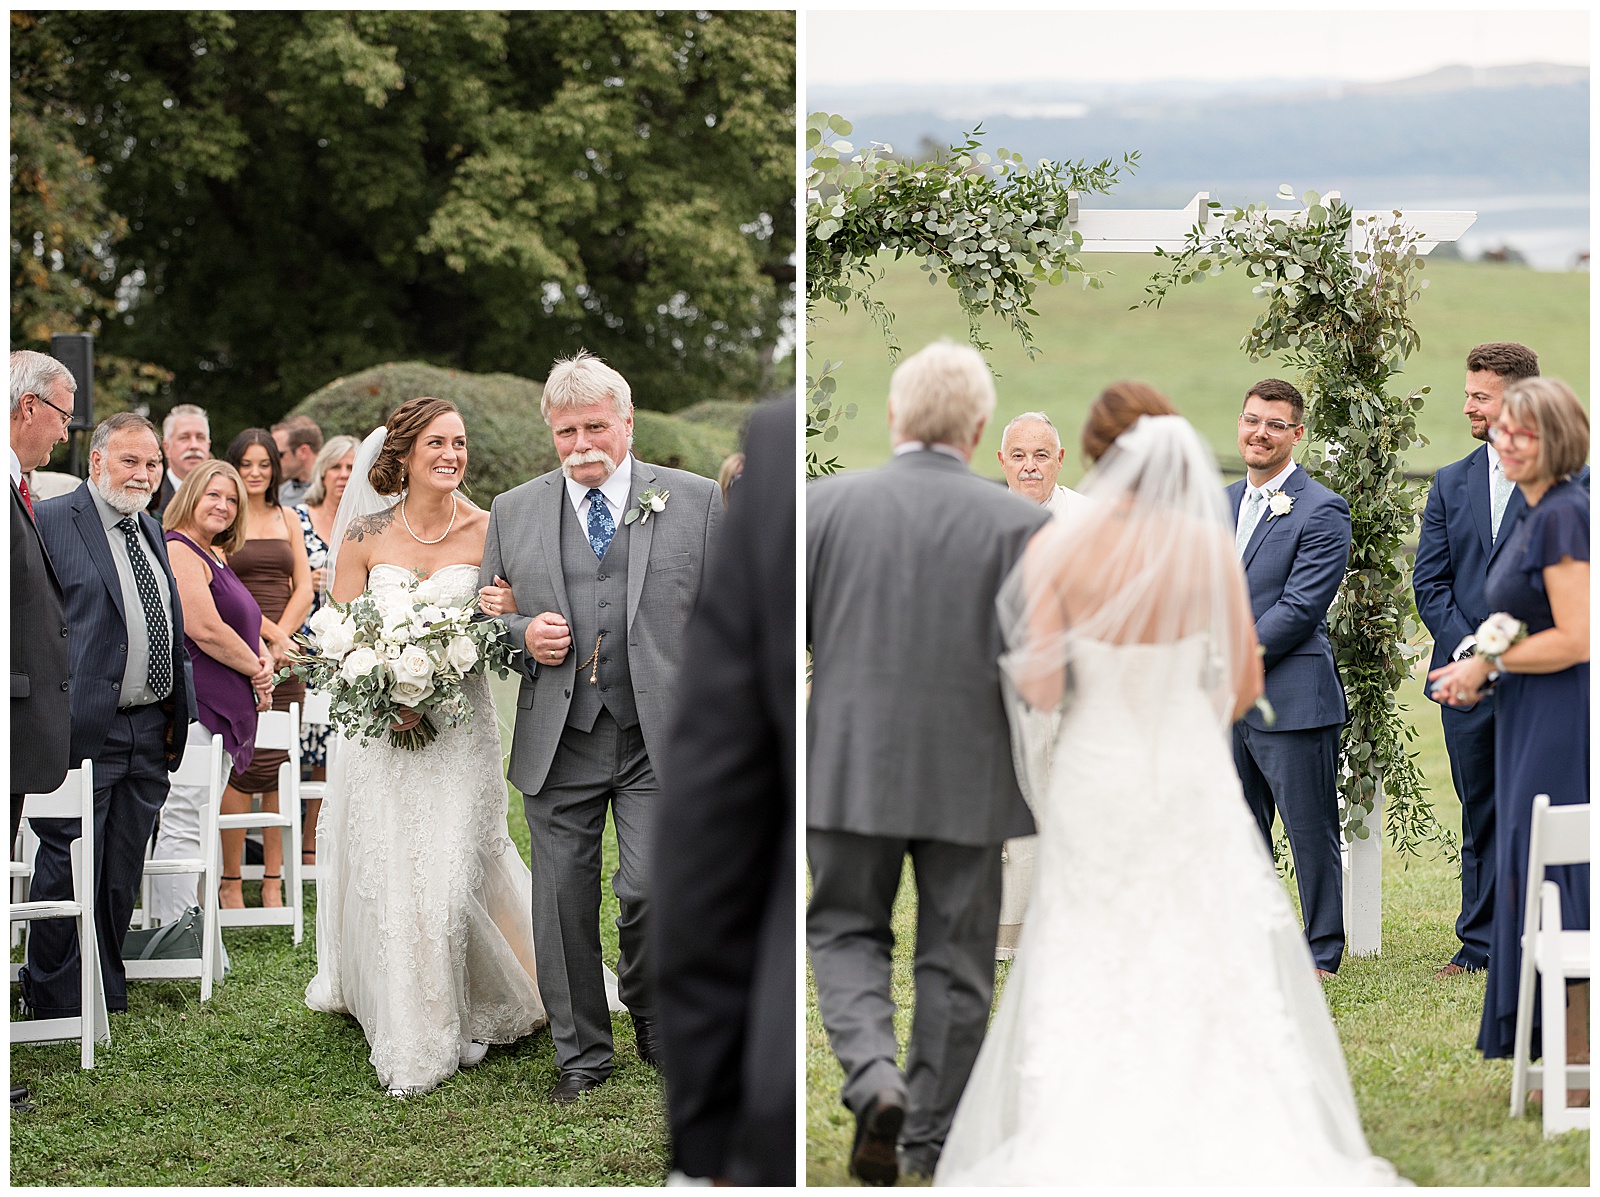 bride's father walking her down the aisle at outdoor wedding ceremony on cloudy day in central pennsylvania